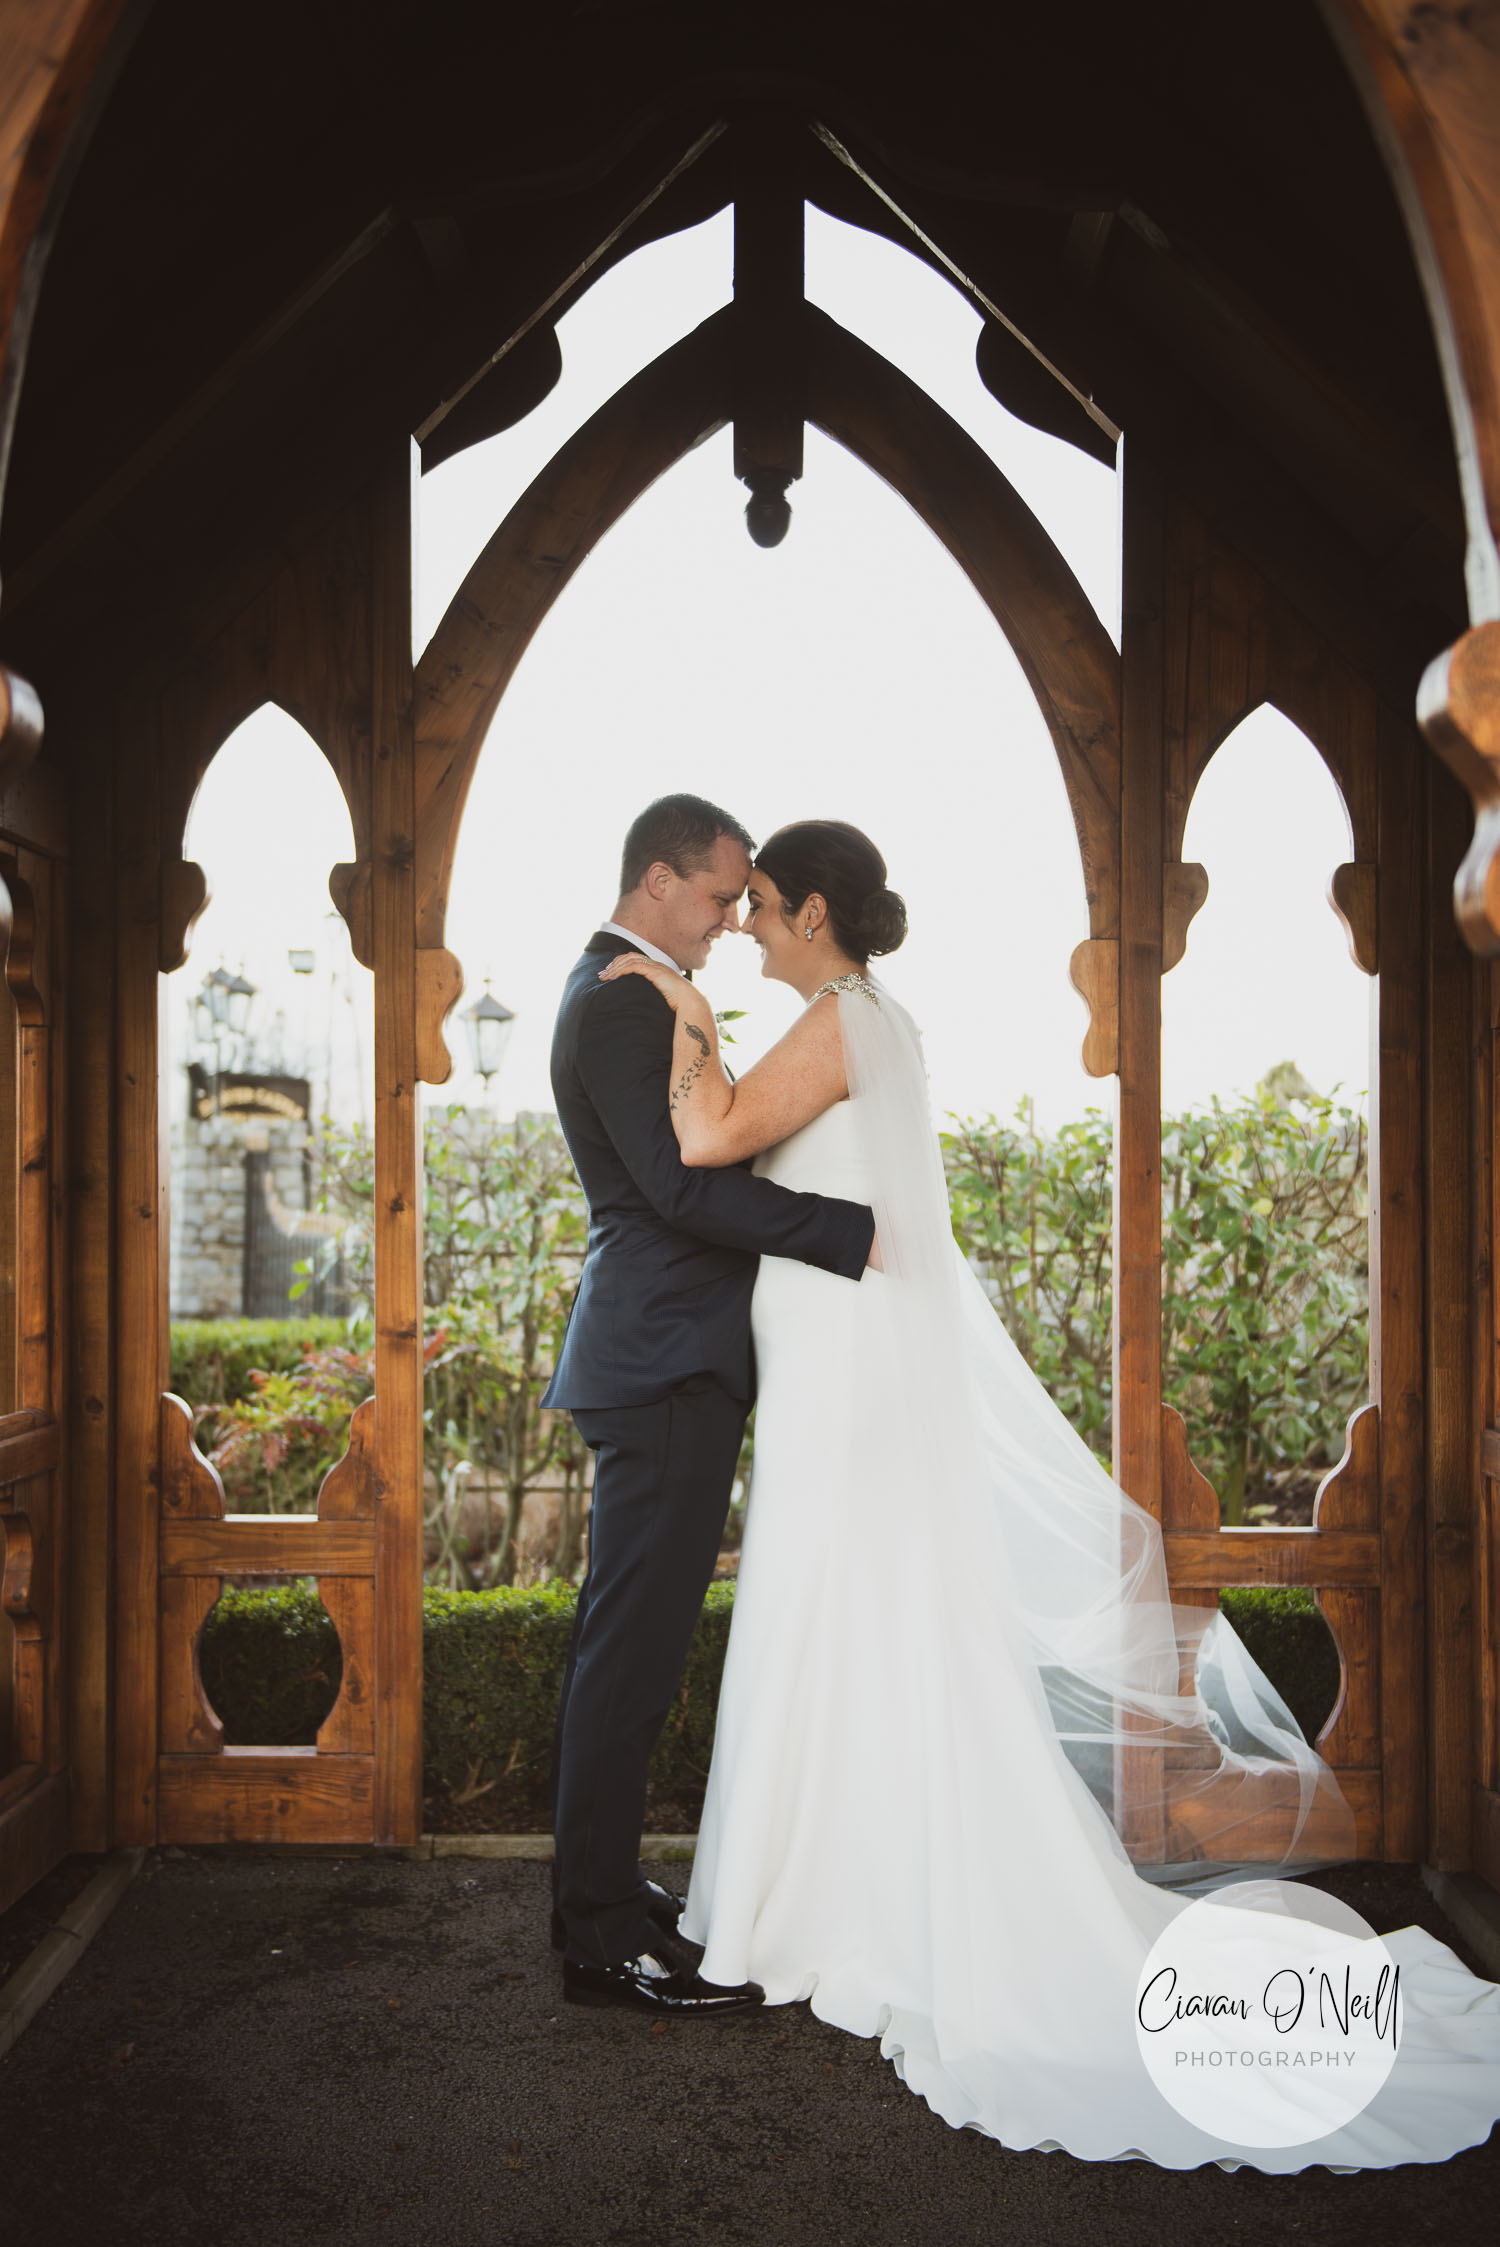 bride and groom standing in a wooden church style archway in a garden